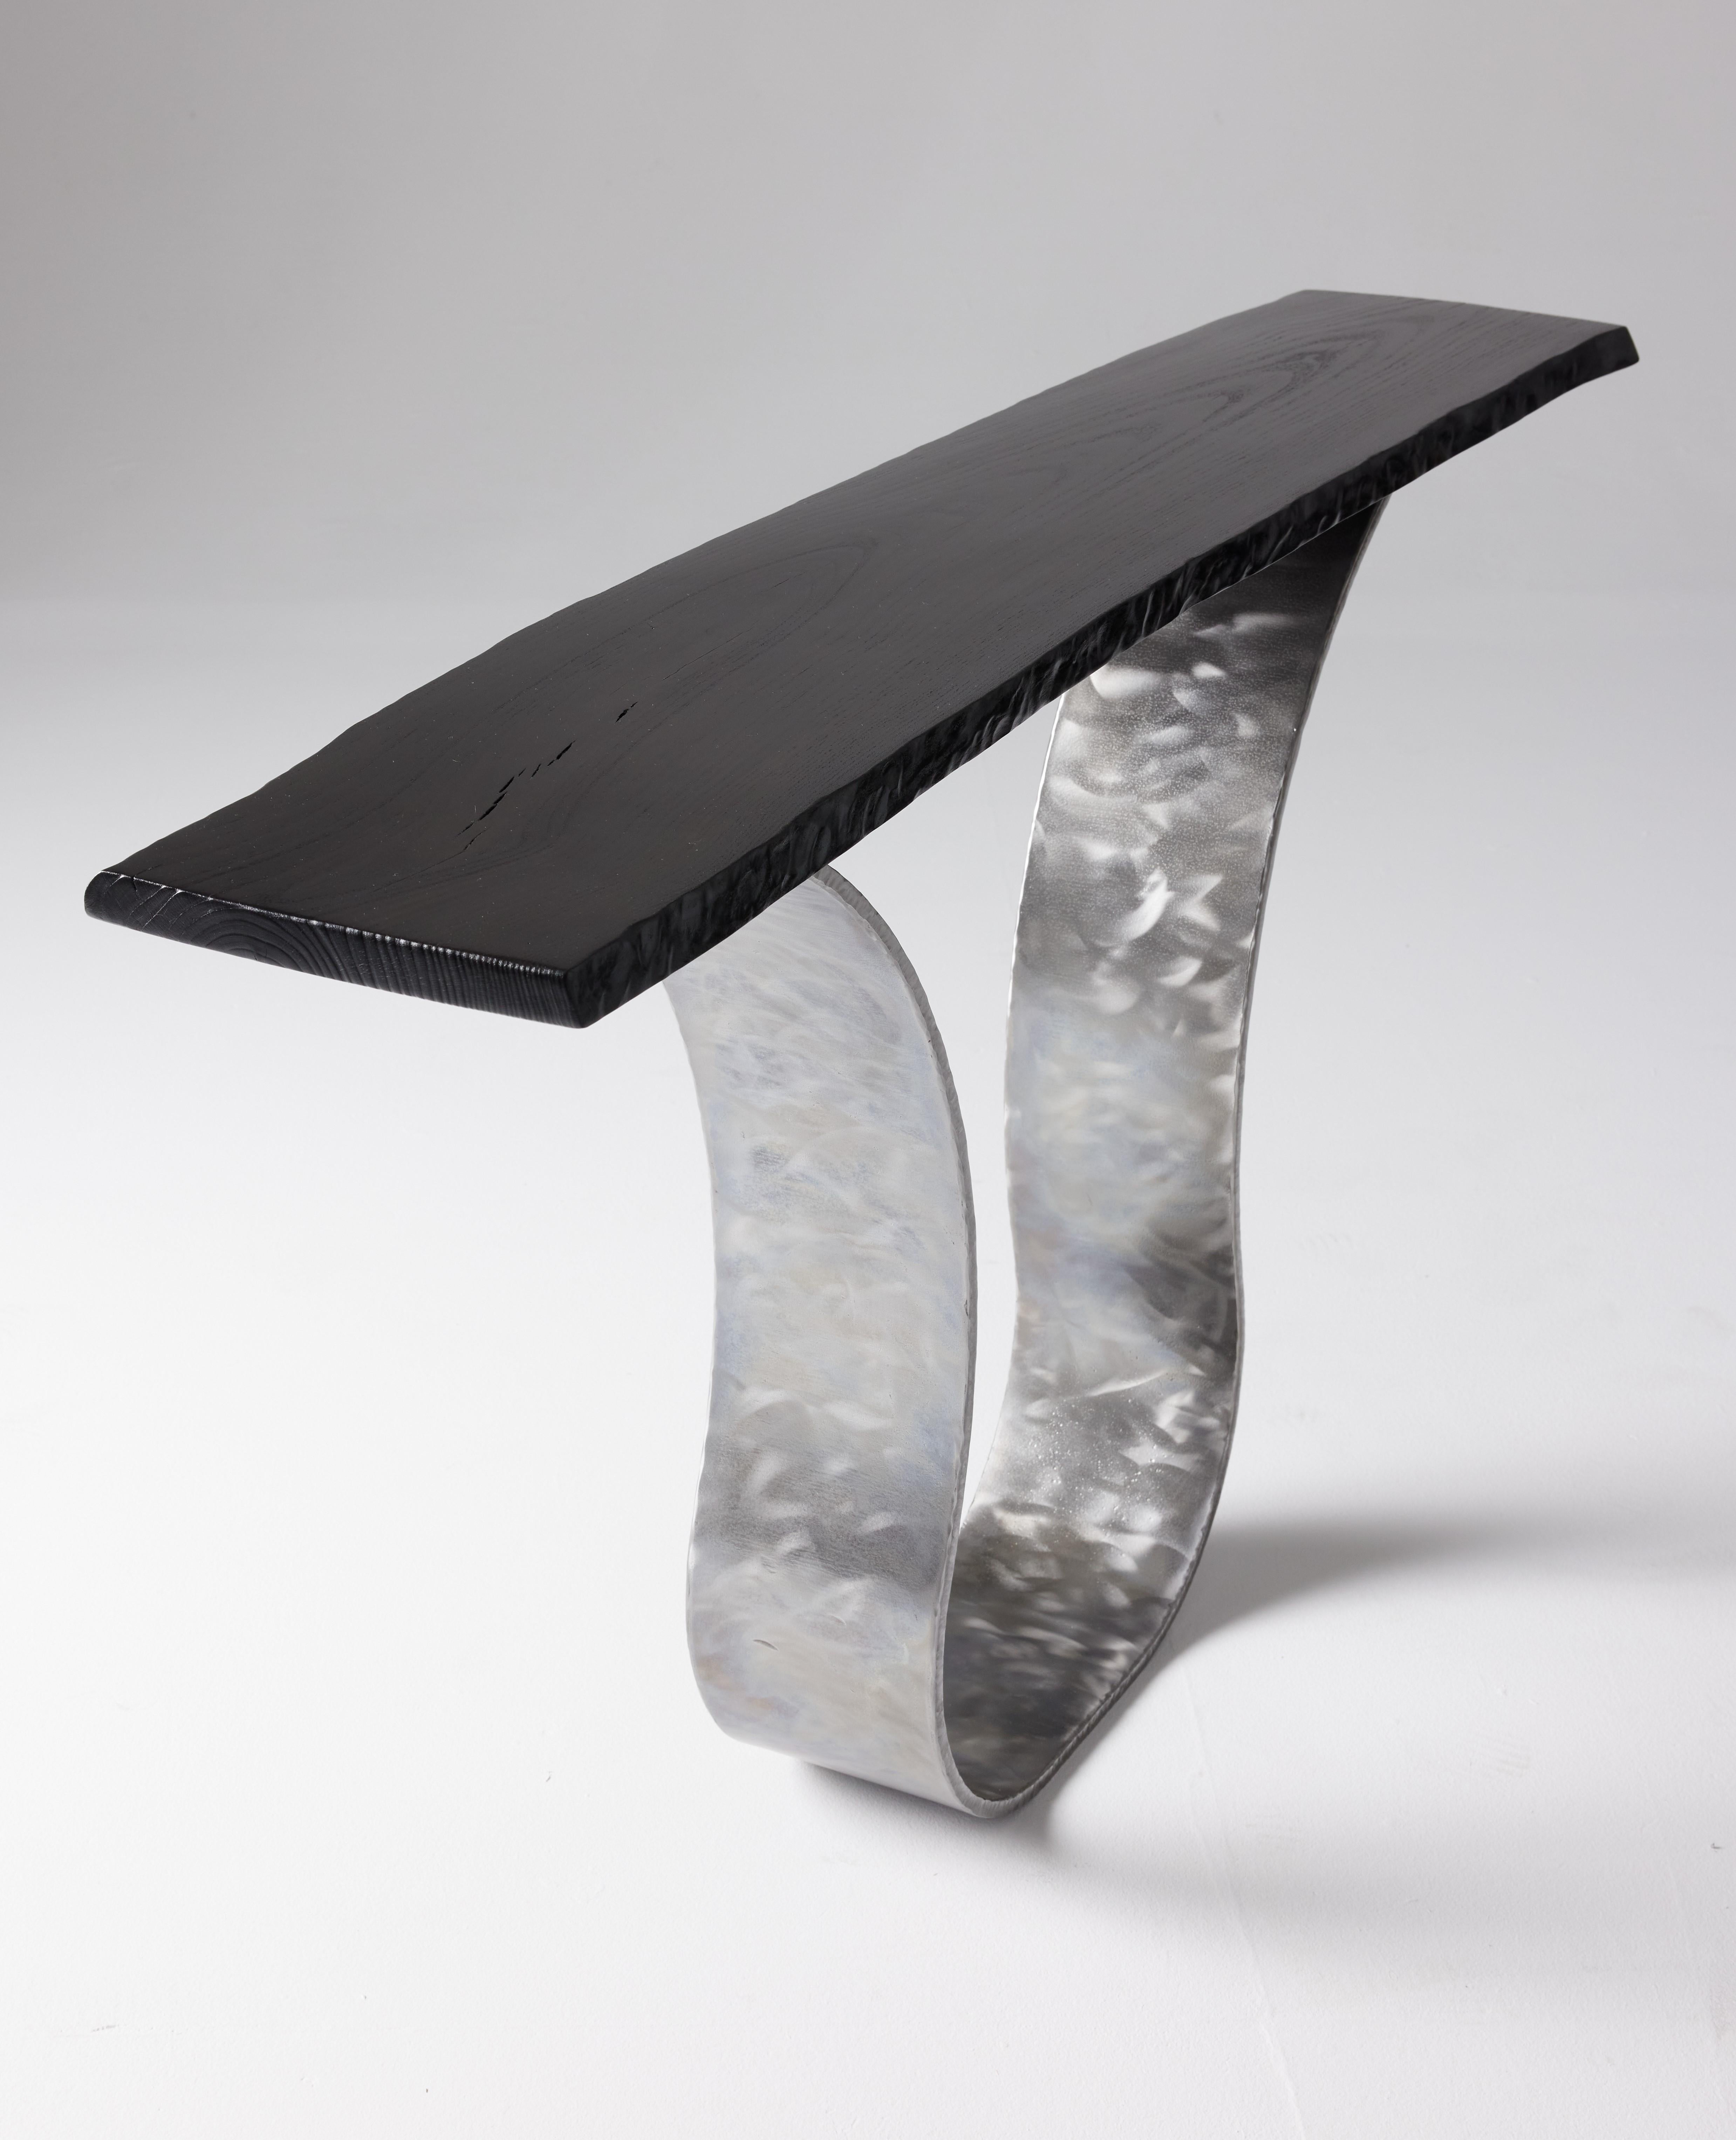 Charred Live Edge Maple on Polished Steel Base Console Table by Carlo Stenta In New Condition For Sale In Redondo Beach, CA